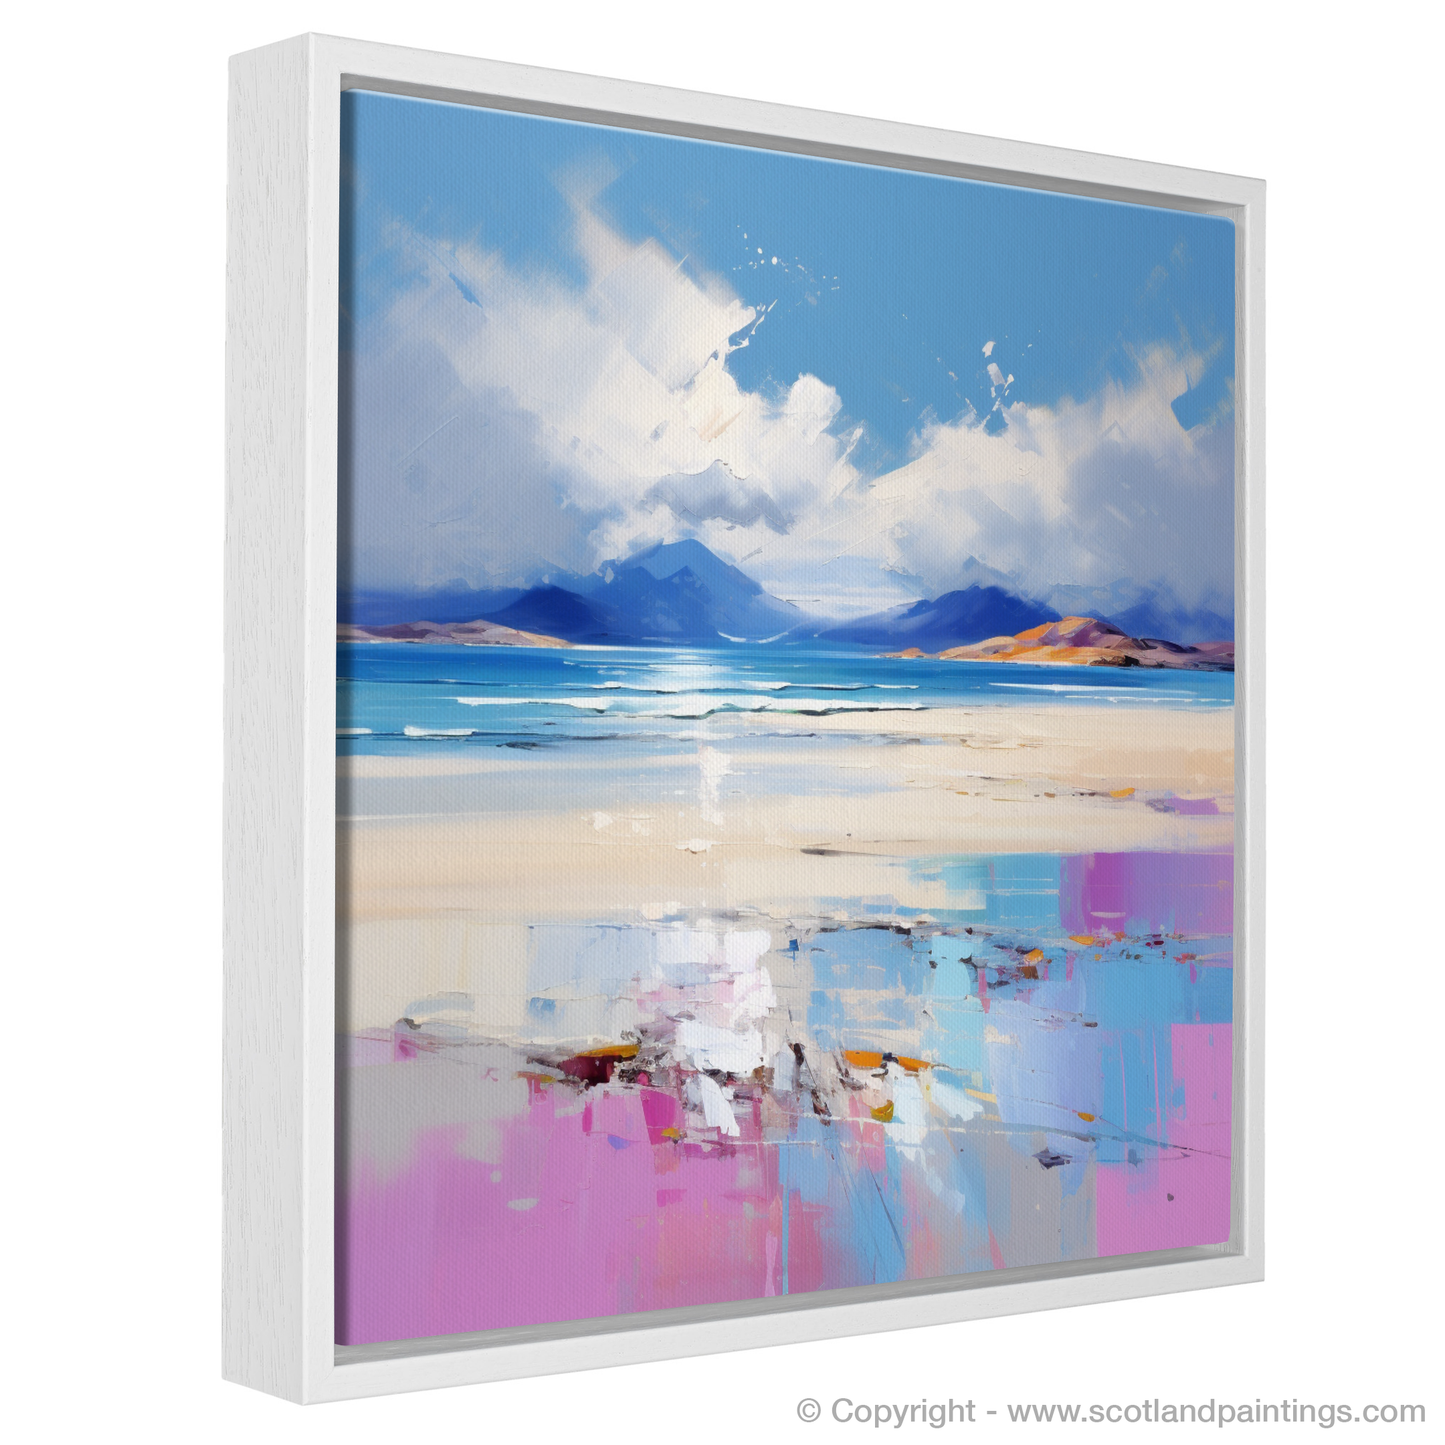 Painting and Art Print of Luskentyre Beach, Isle of Harris entitled "Luskentyre Whispers: An Expressionist Ode to the Hebrides".